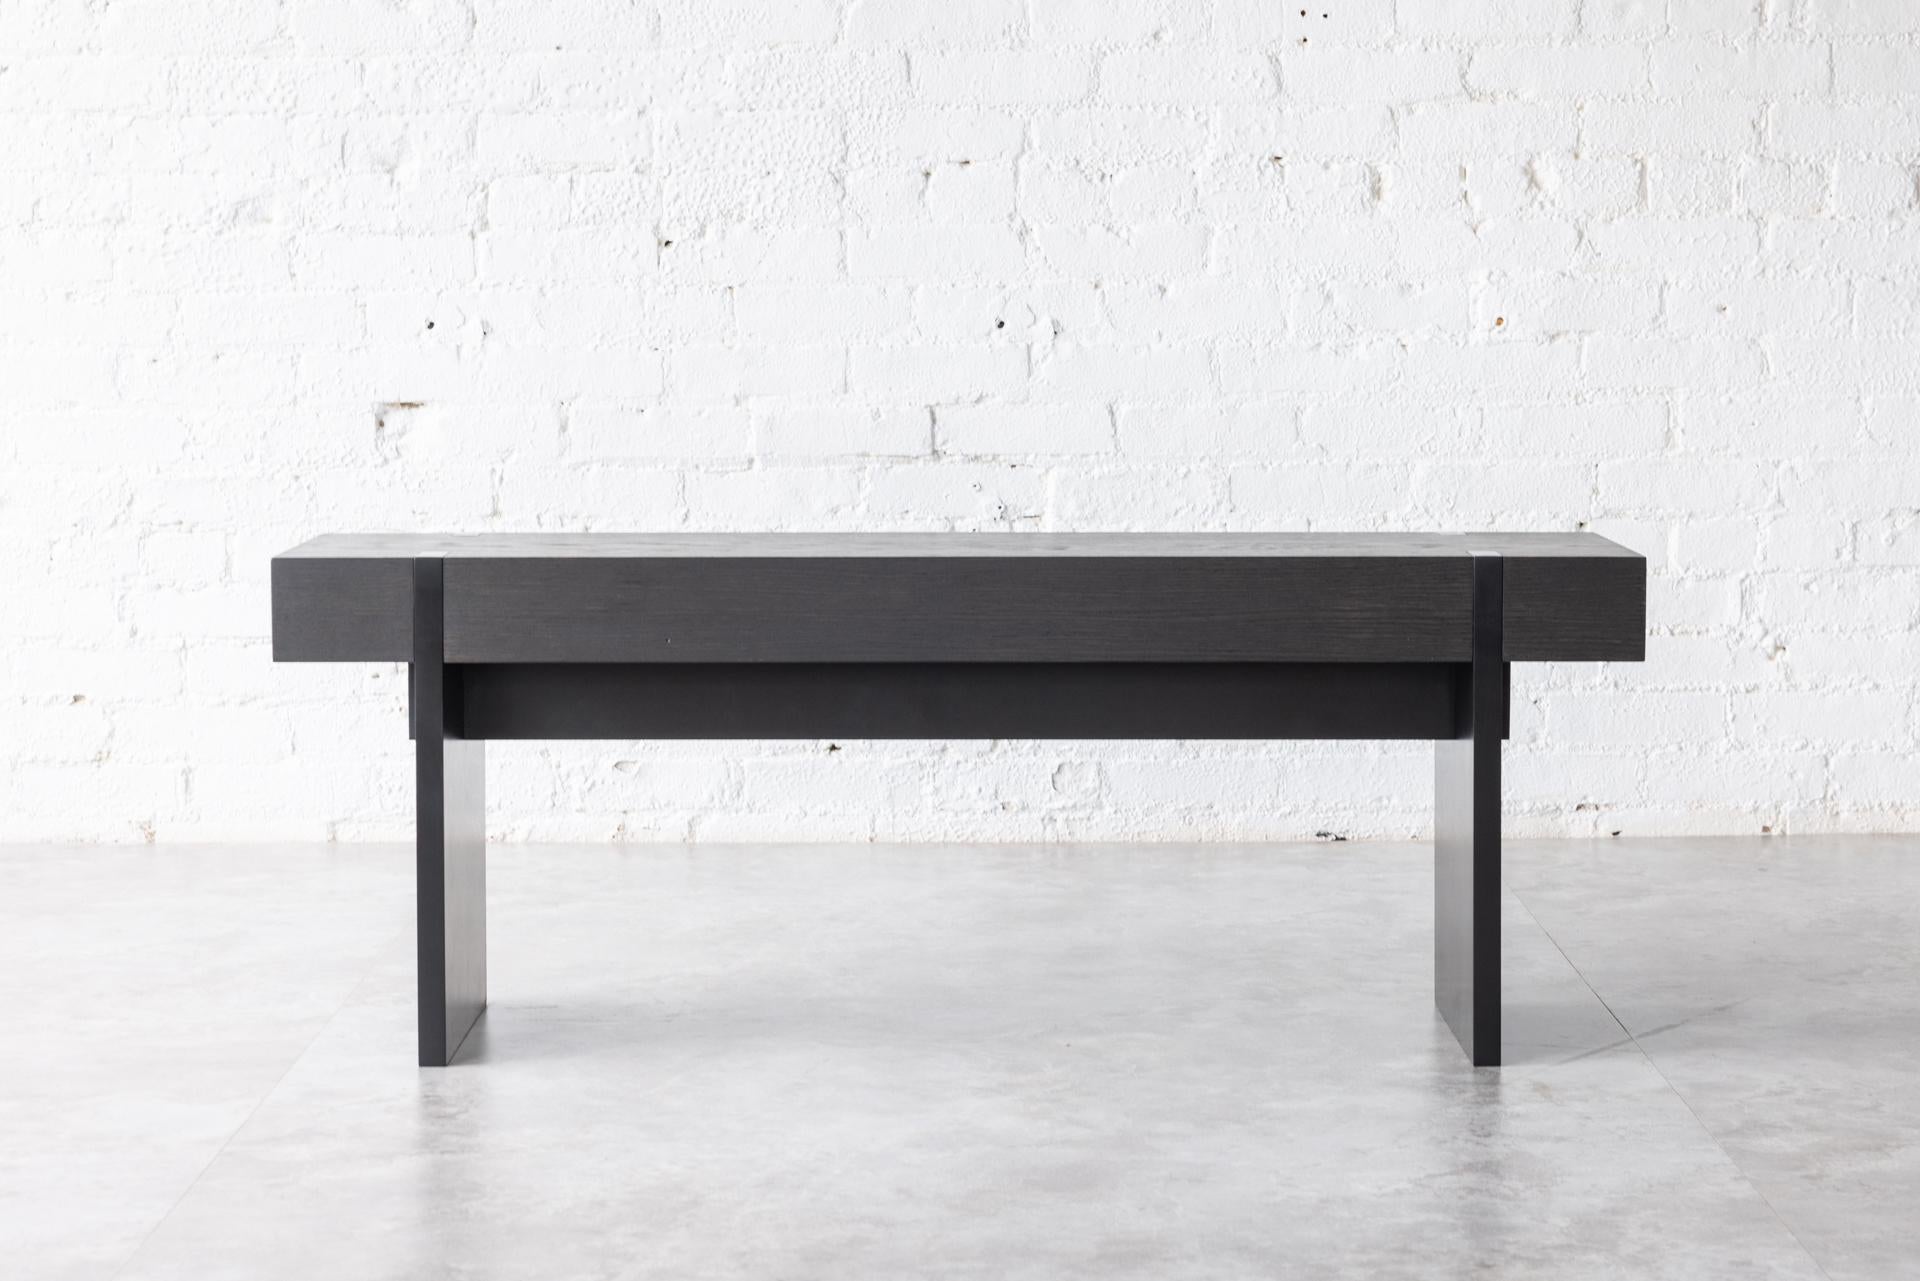 The Tillikum bench in Blackened Oak is set on matte black frame and legs for a dramatic statement. The minimalist design by Kirk Van Ludwig combines these elements to create a modern entrance bench.

A tailored bench for contemporary design-driven